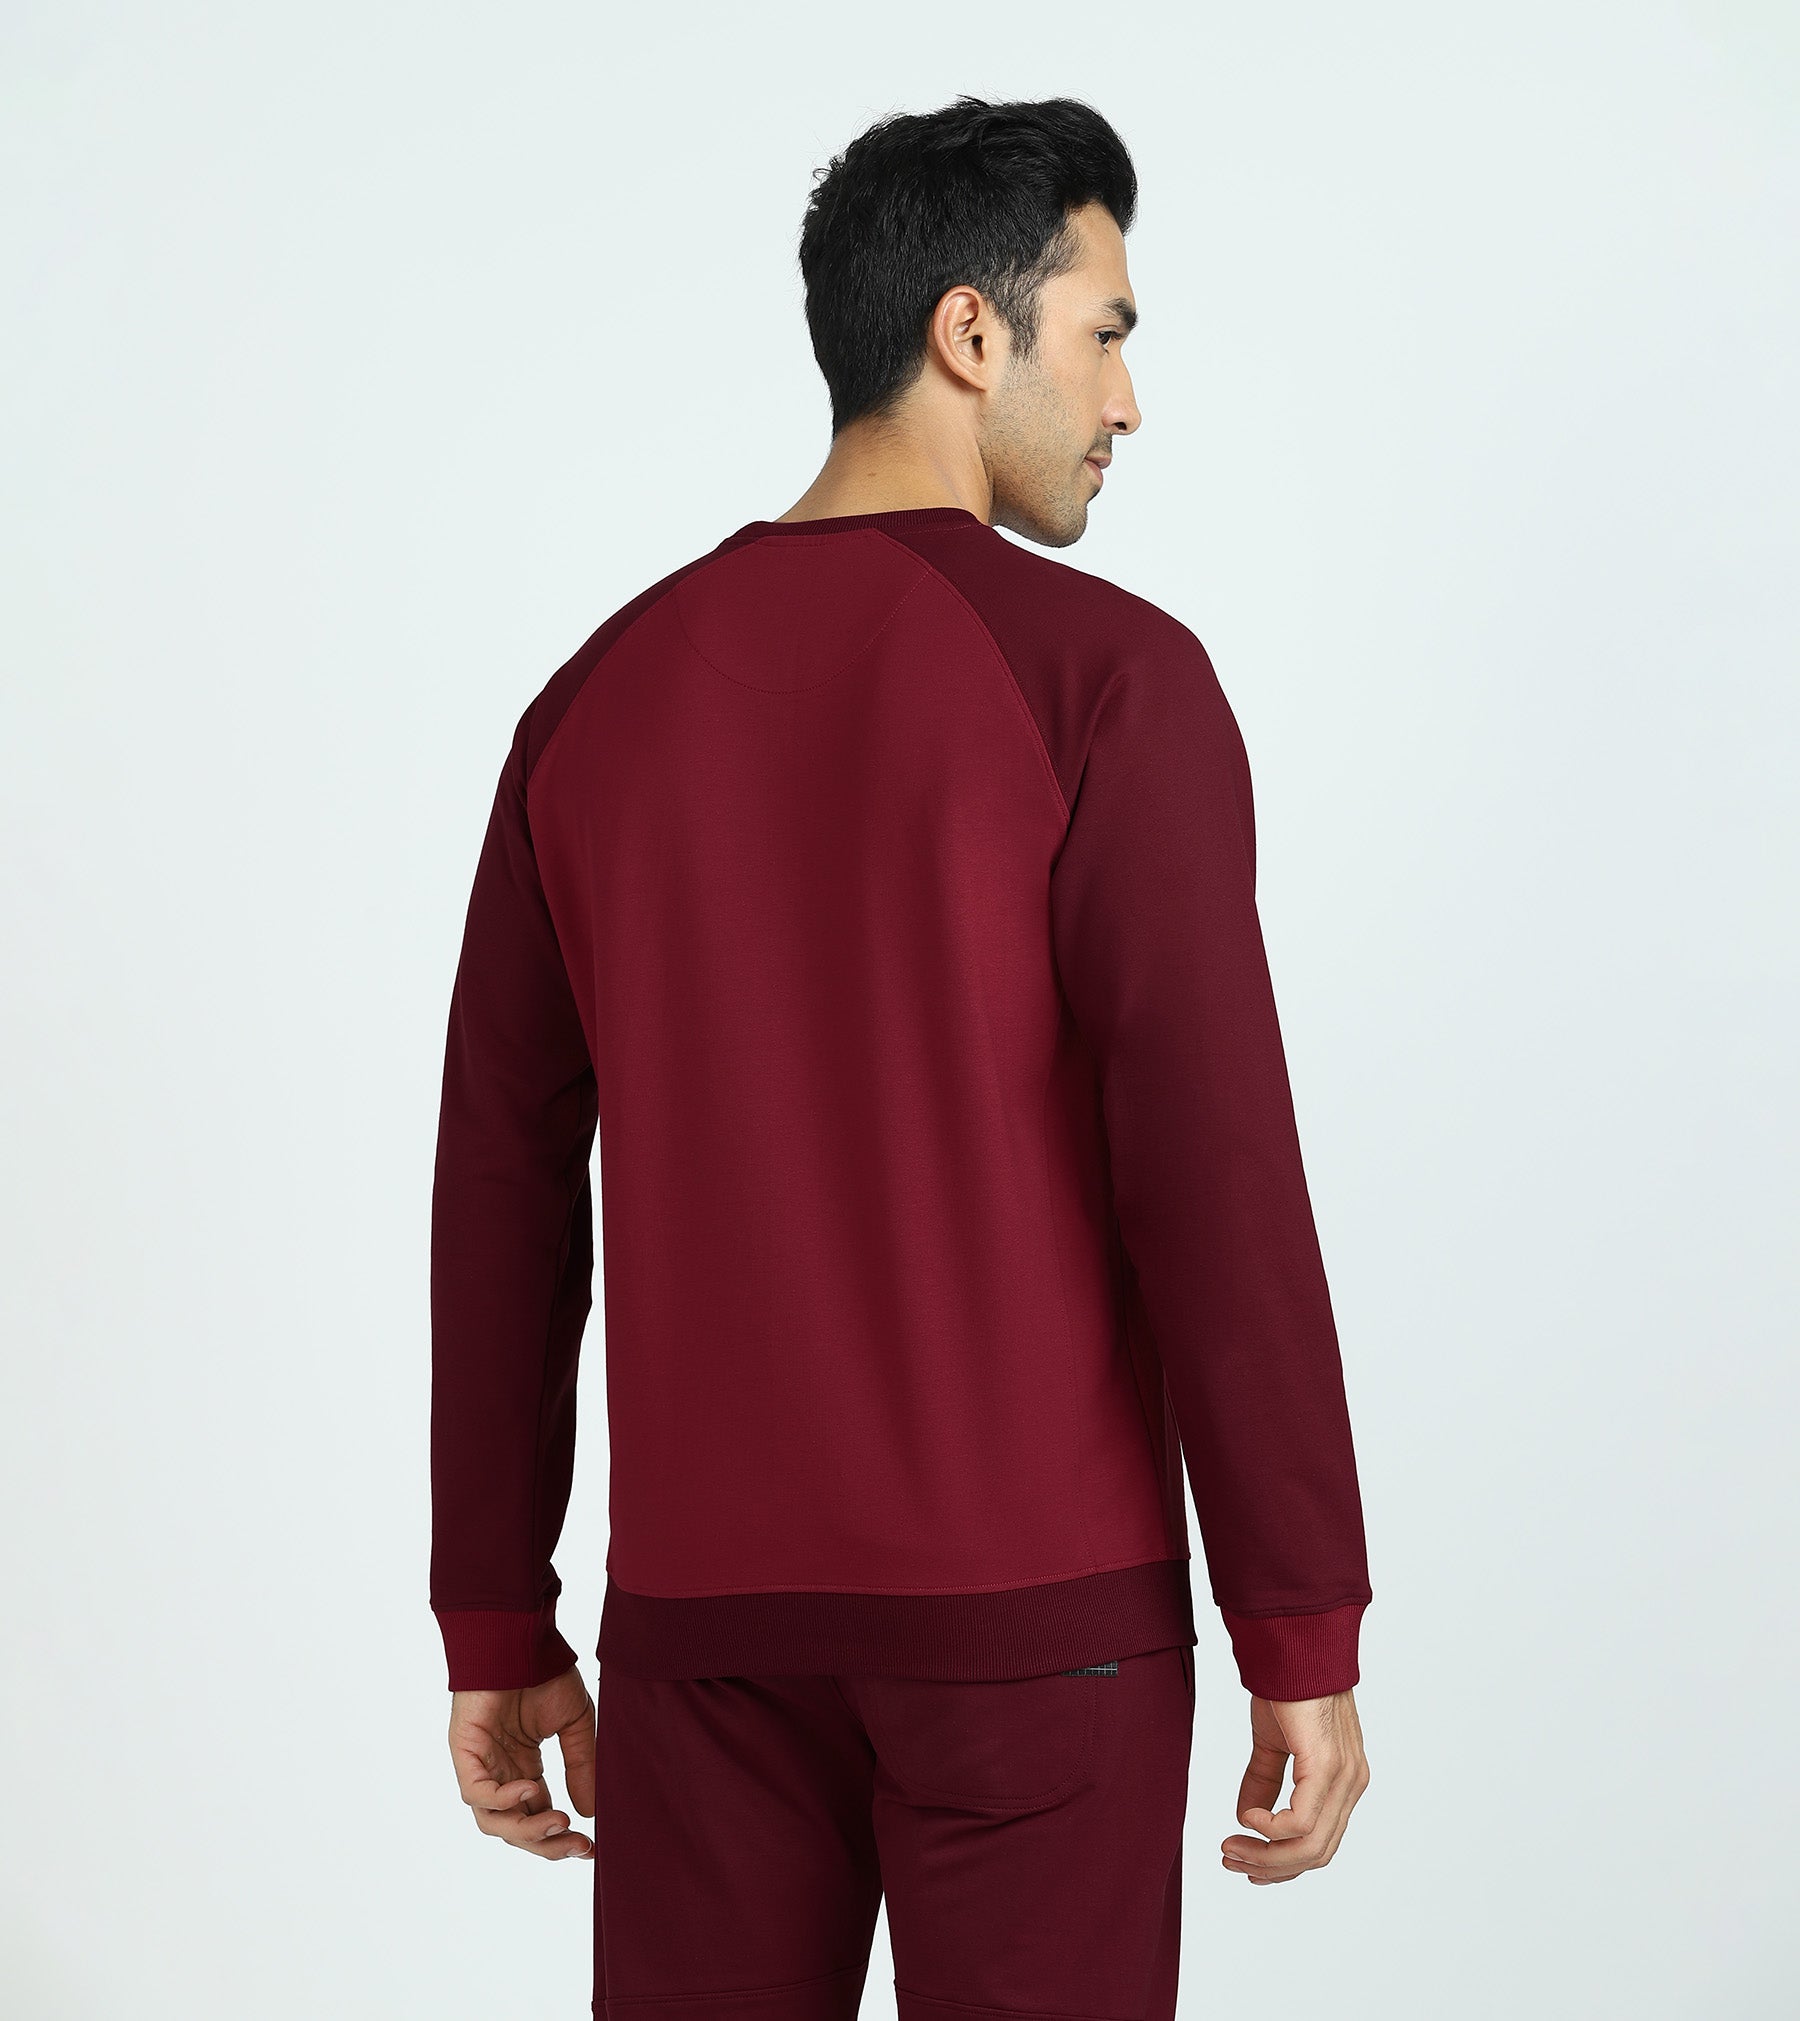 Quest French Terry Cotton-Blend Sweatshirts For Men Scarlet Red - XYXX Mens Apparels